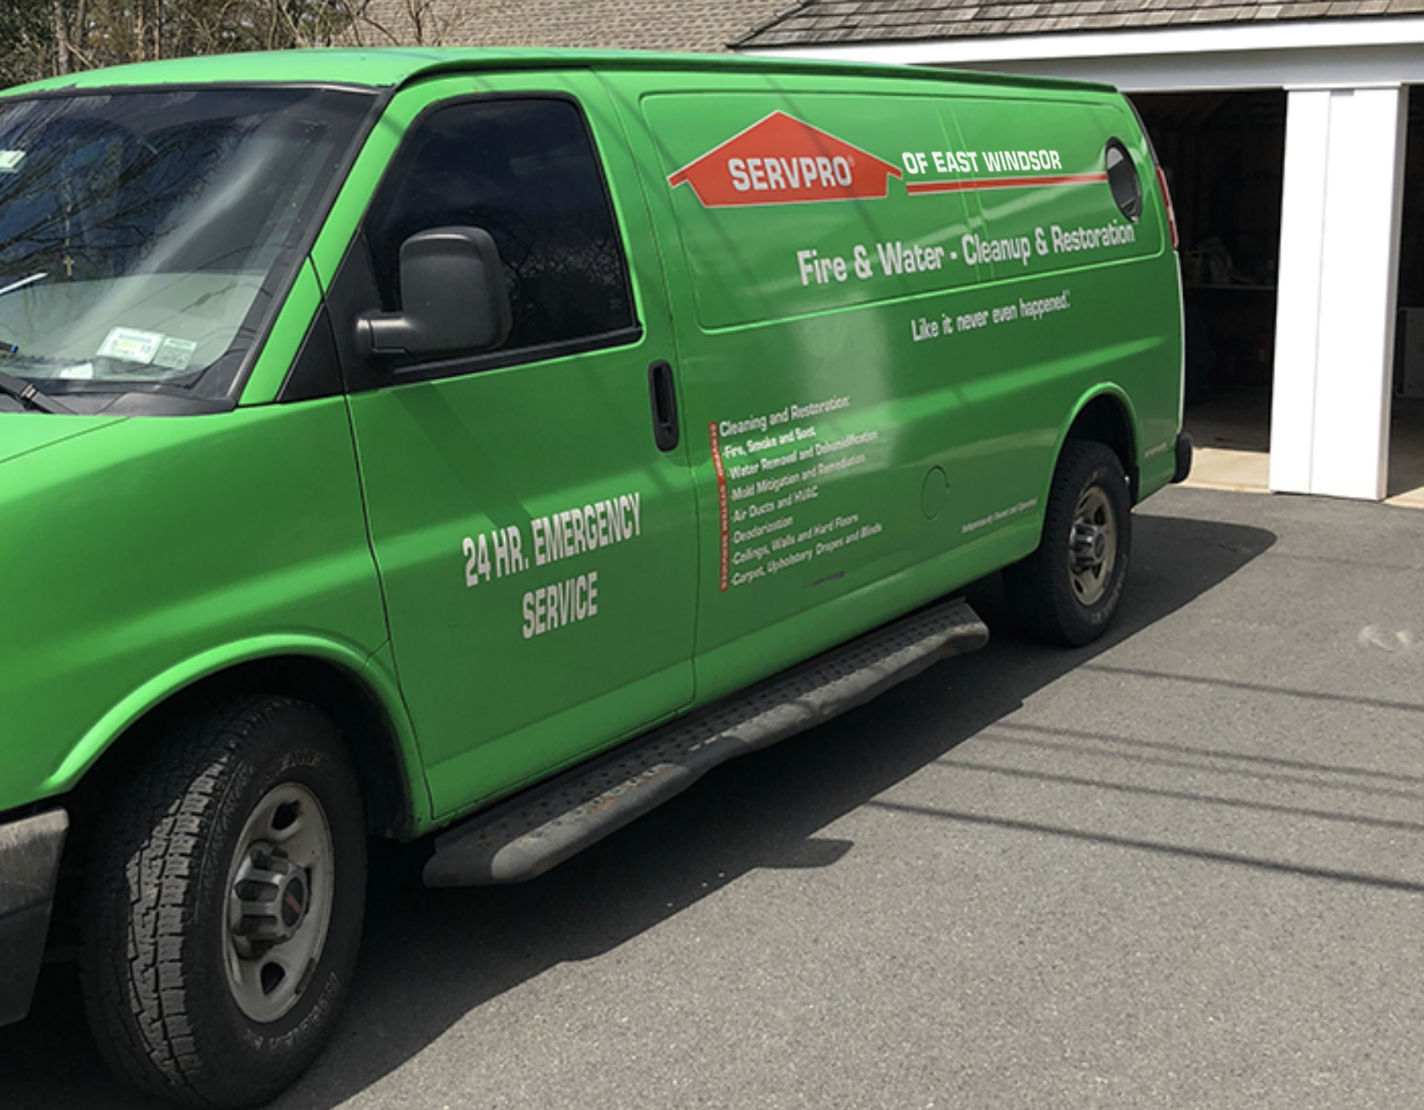 SERVPRO service vehicle equipped to help local residents with property damage restoration